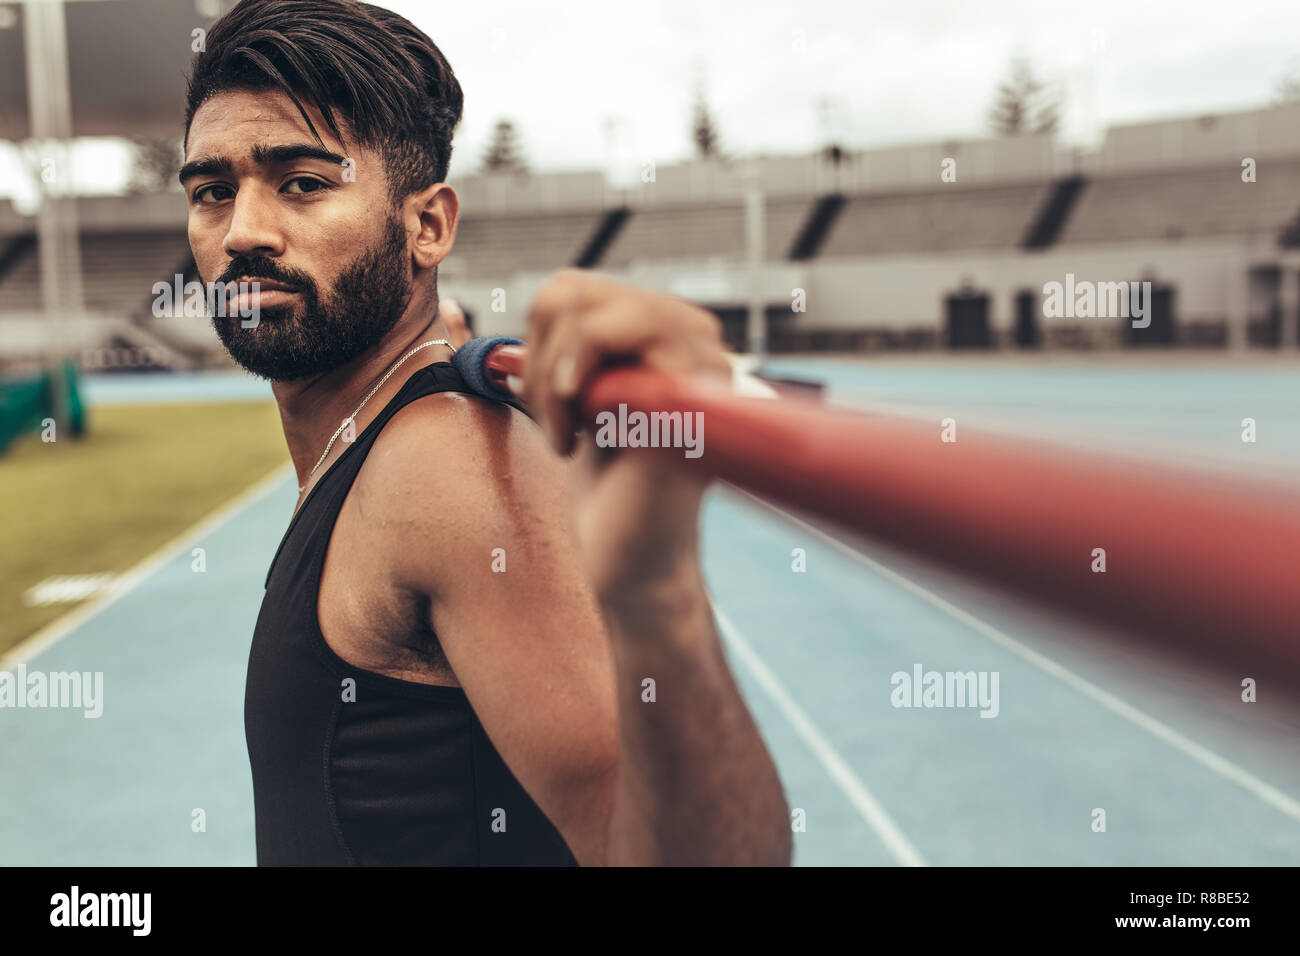 Close up of an athlete standing on track holding a javelin on his shoulders. Man training in javelin throw in a stadium. Stock Photo